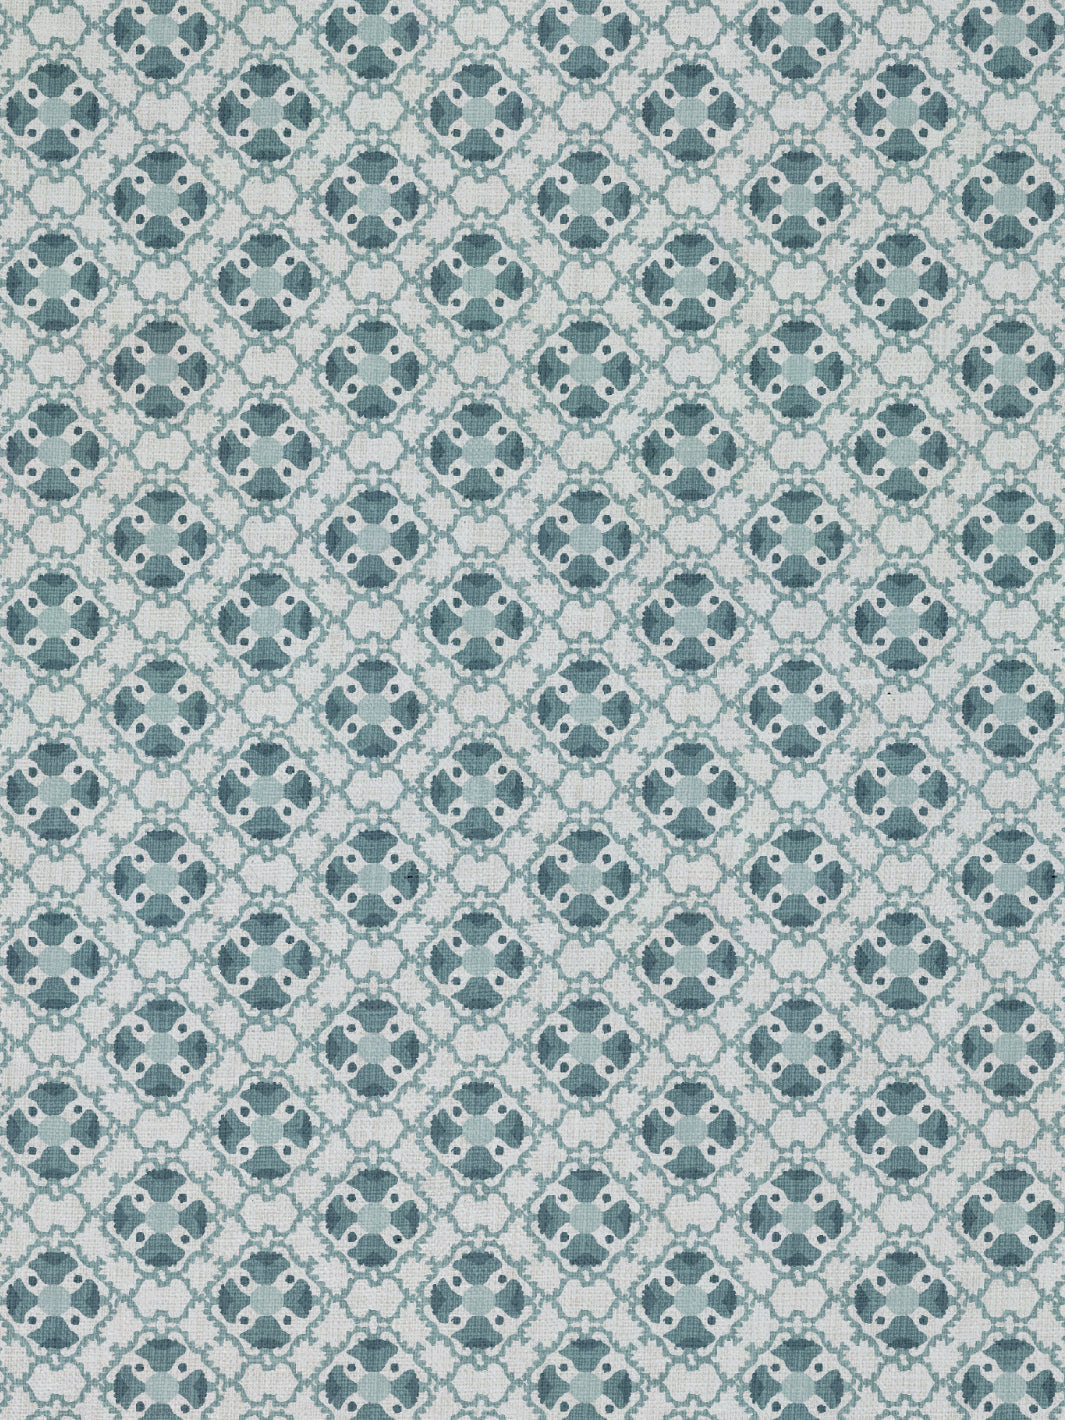 'Medallion All Over' Linen Fabric by Nathan Turner - Seafoam